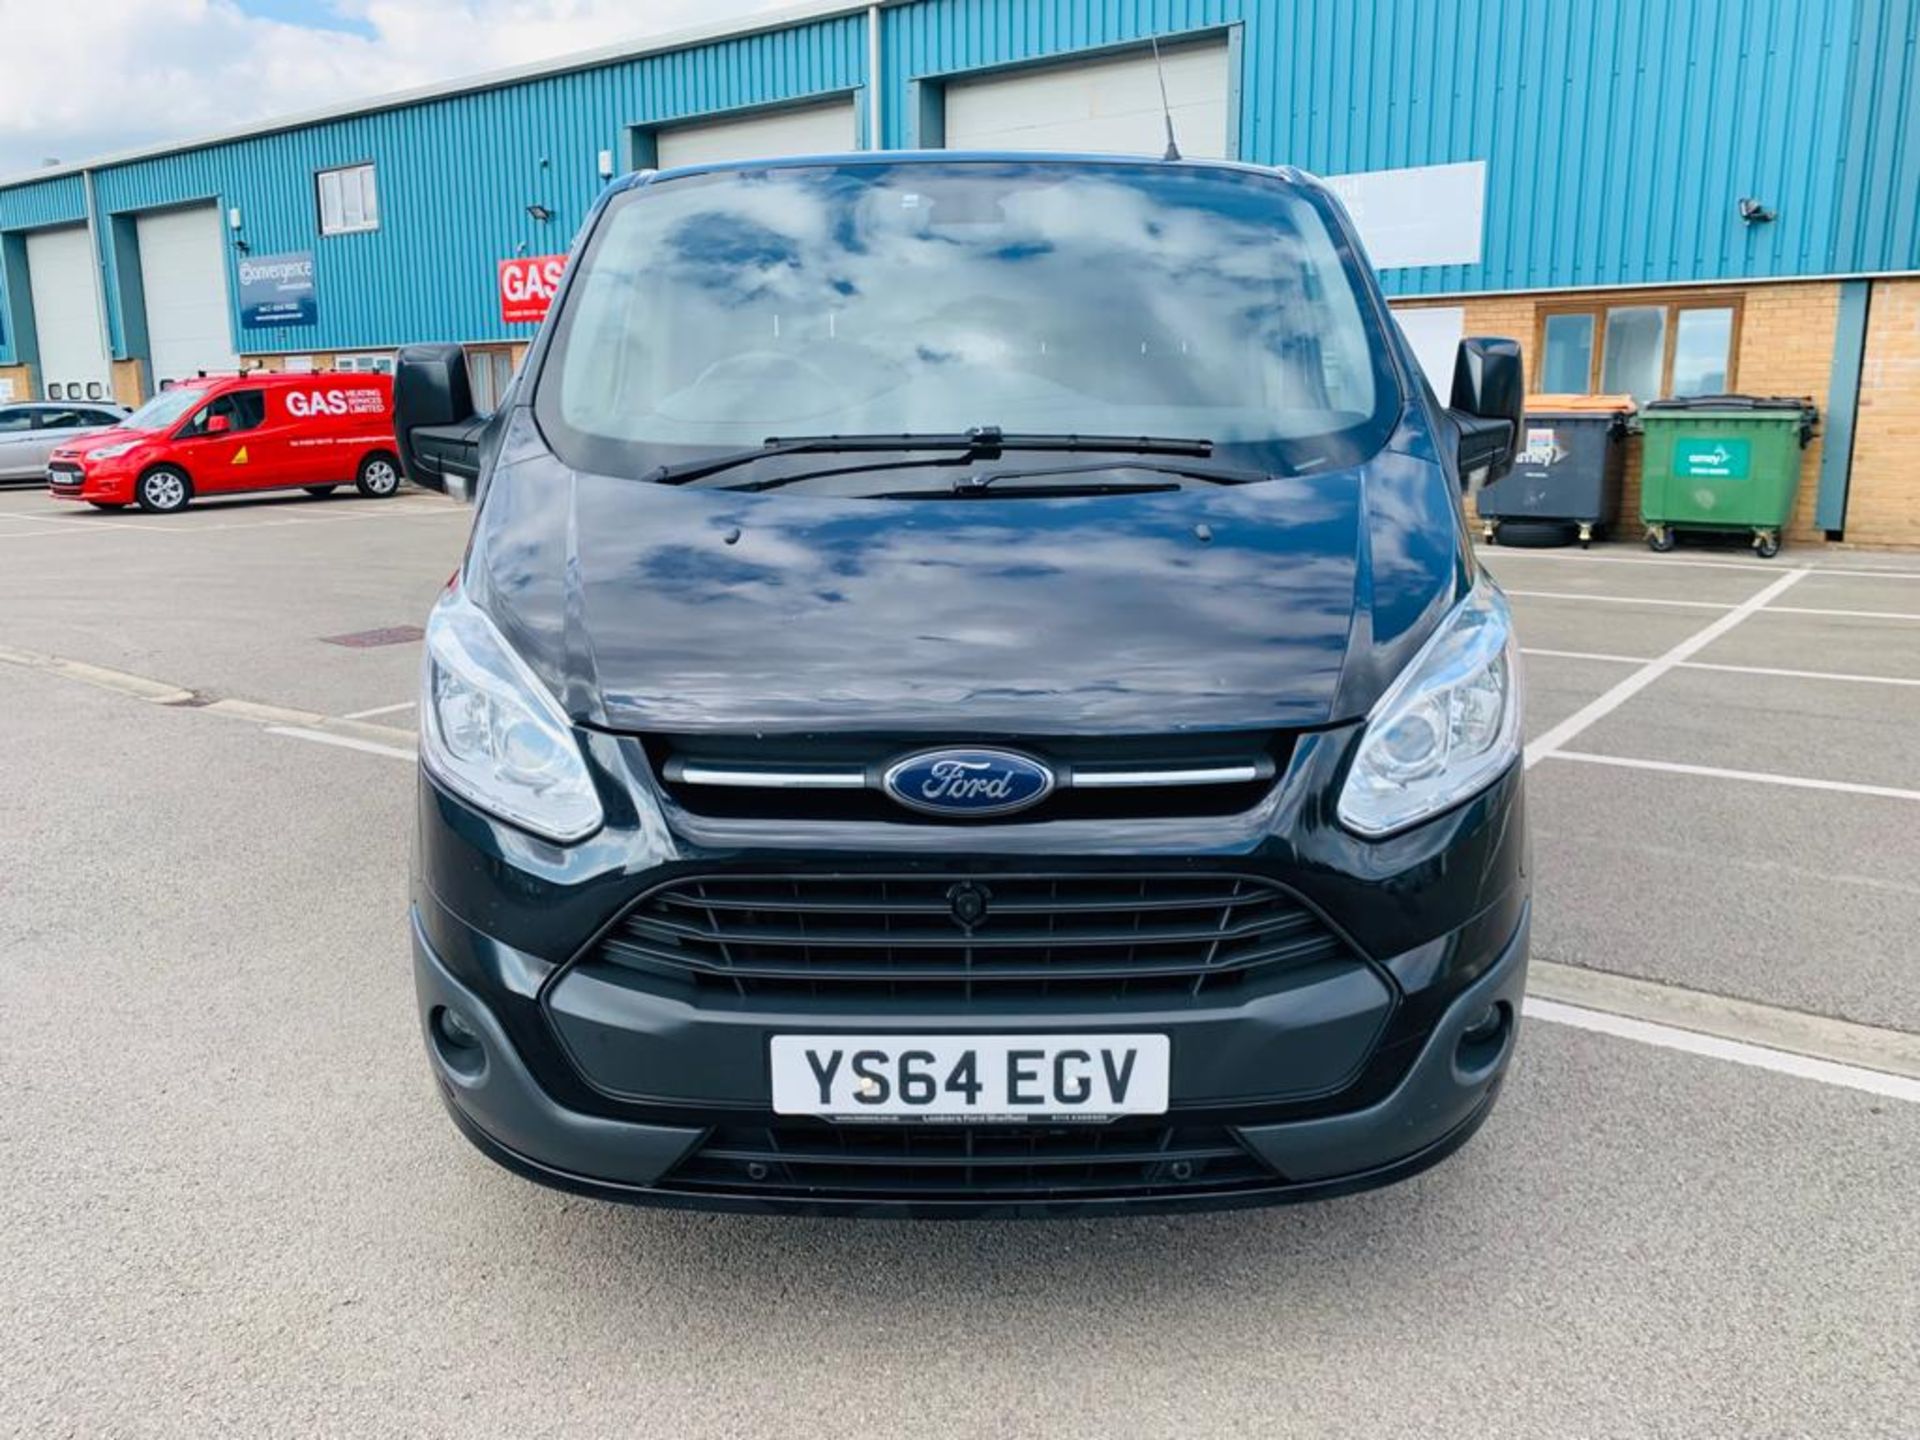 Ford Transit 2.2 TDCI Custom 270 Limited 2015 Model 6 Speed - Air Con - Park Assist - Image 4 of 26